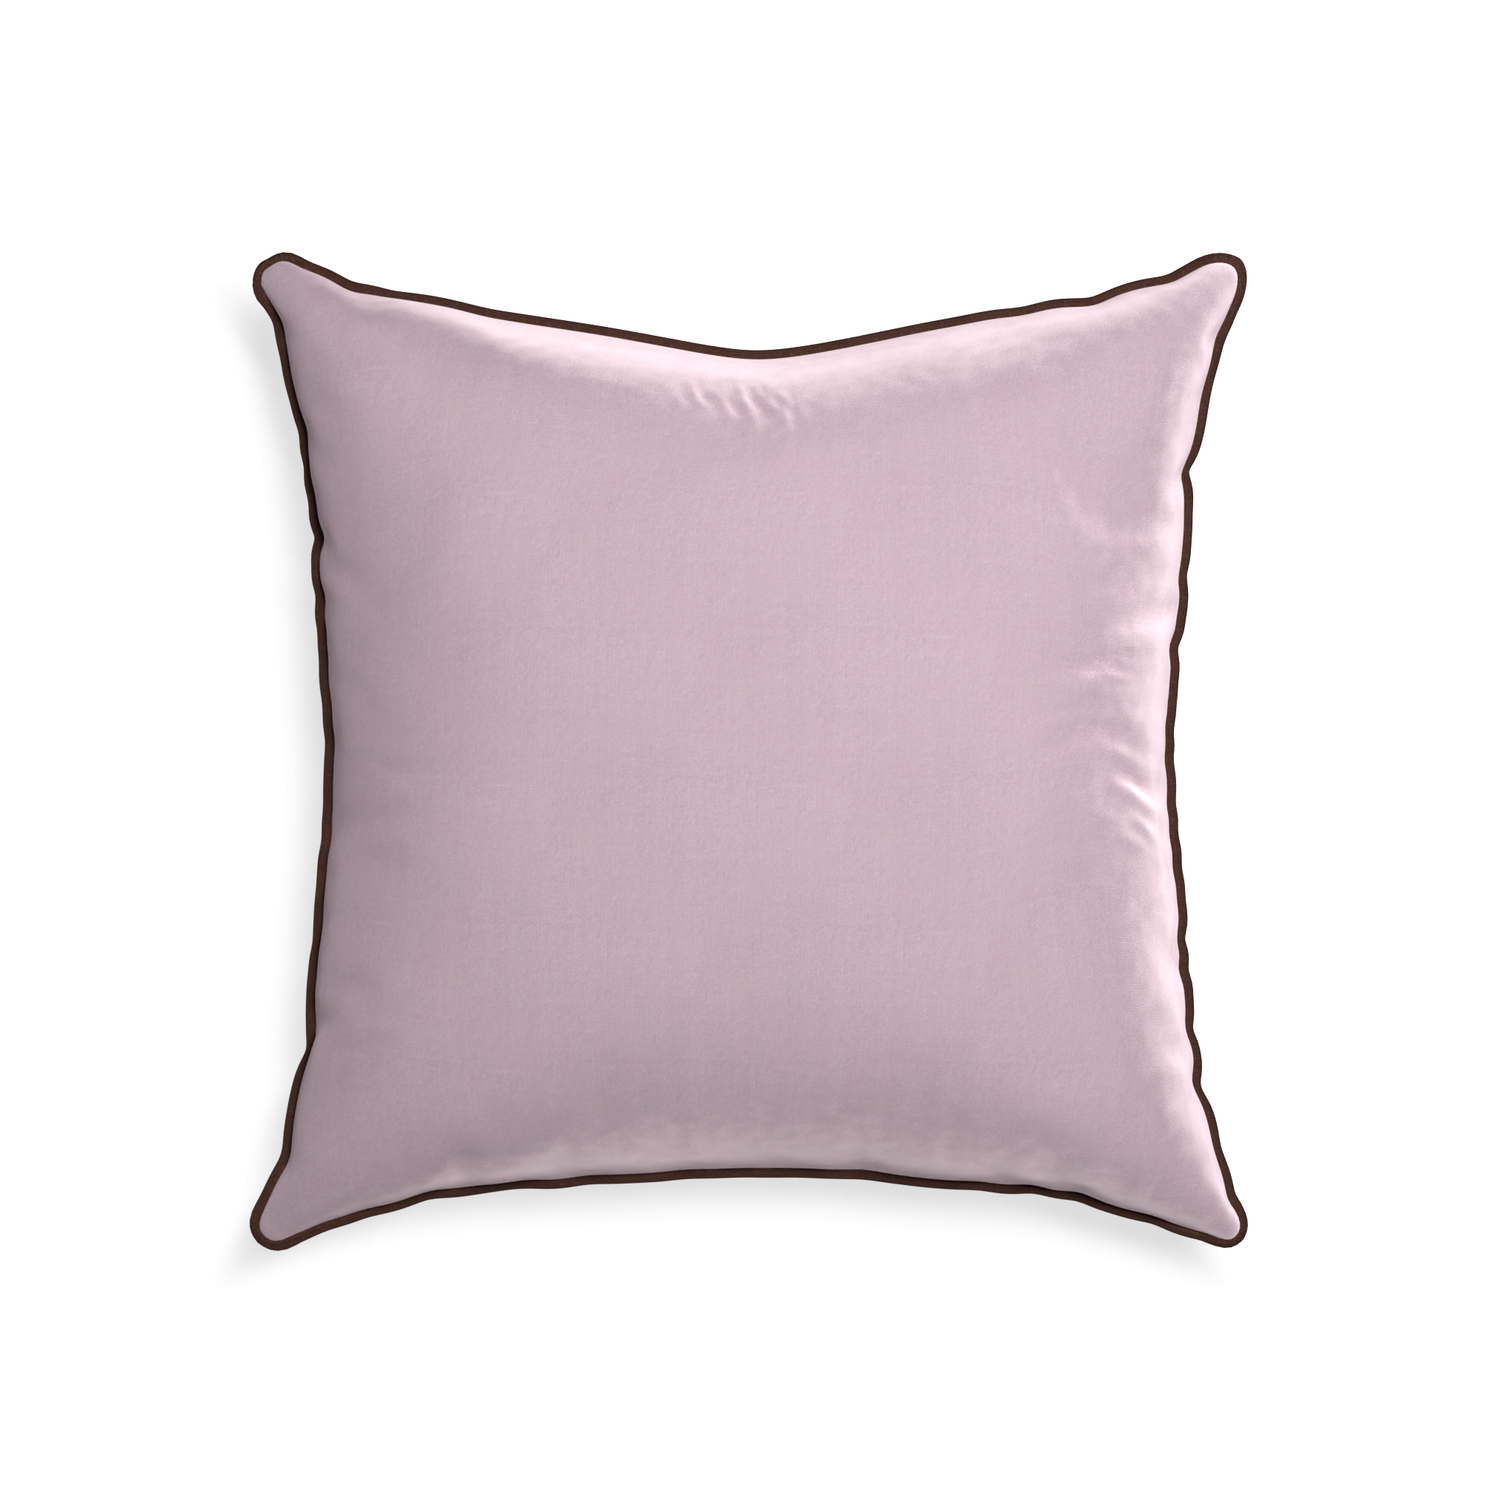 22-square lilac velvet custom pillow with w piping on white background